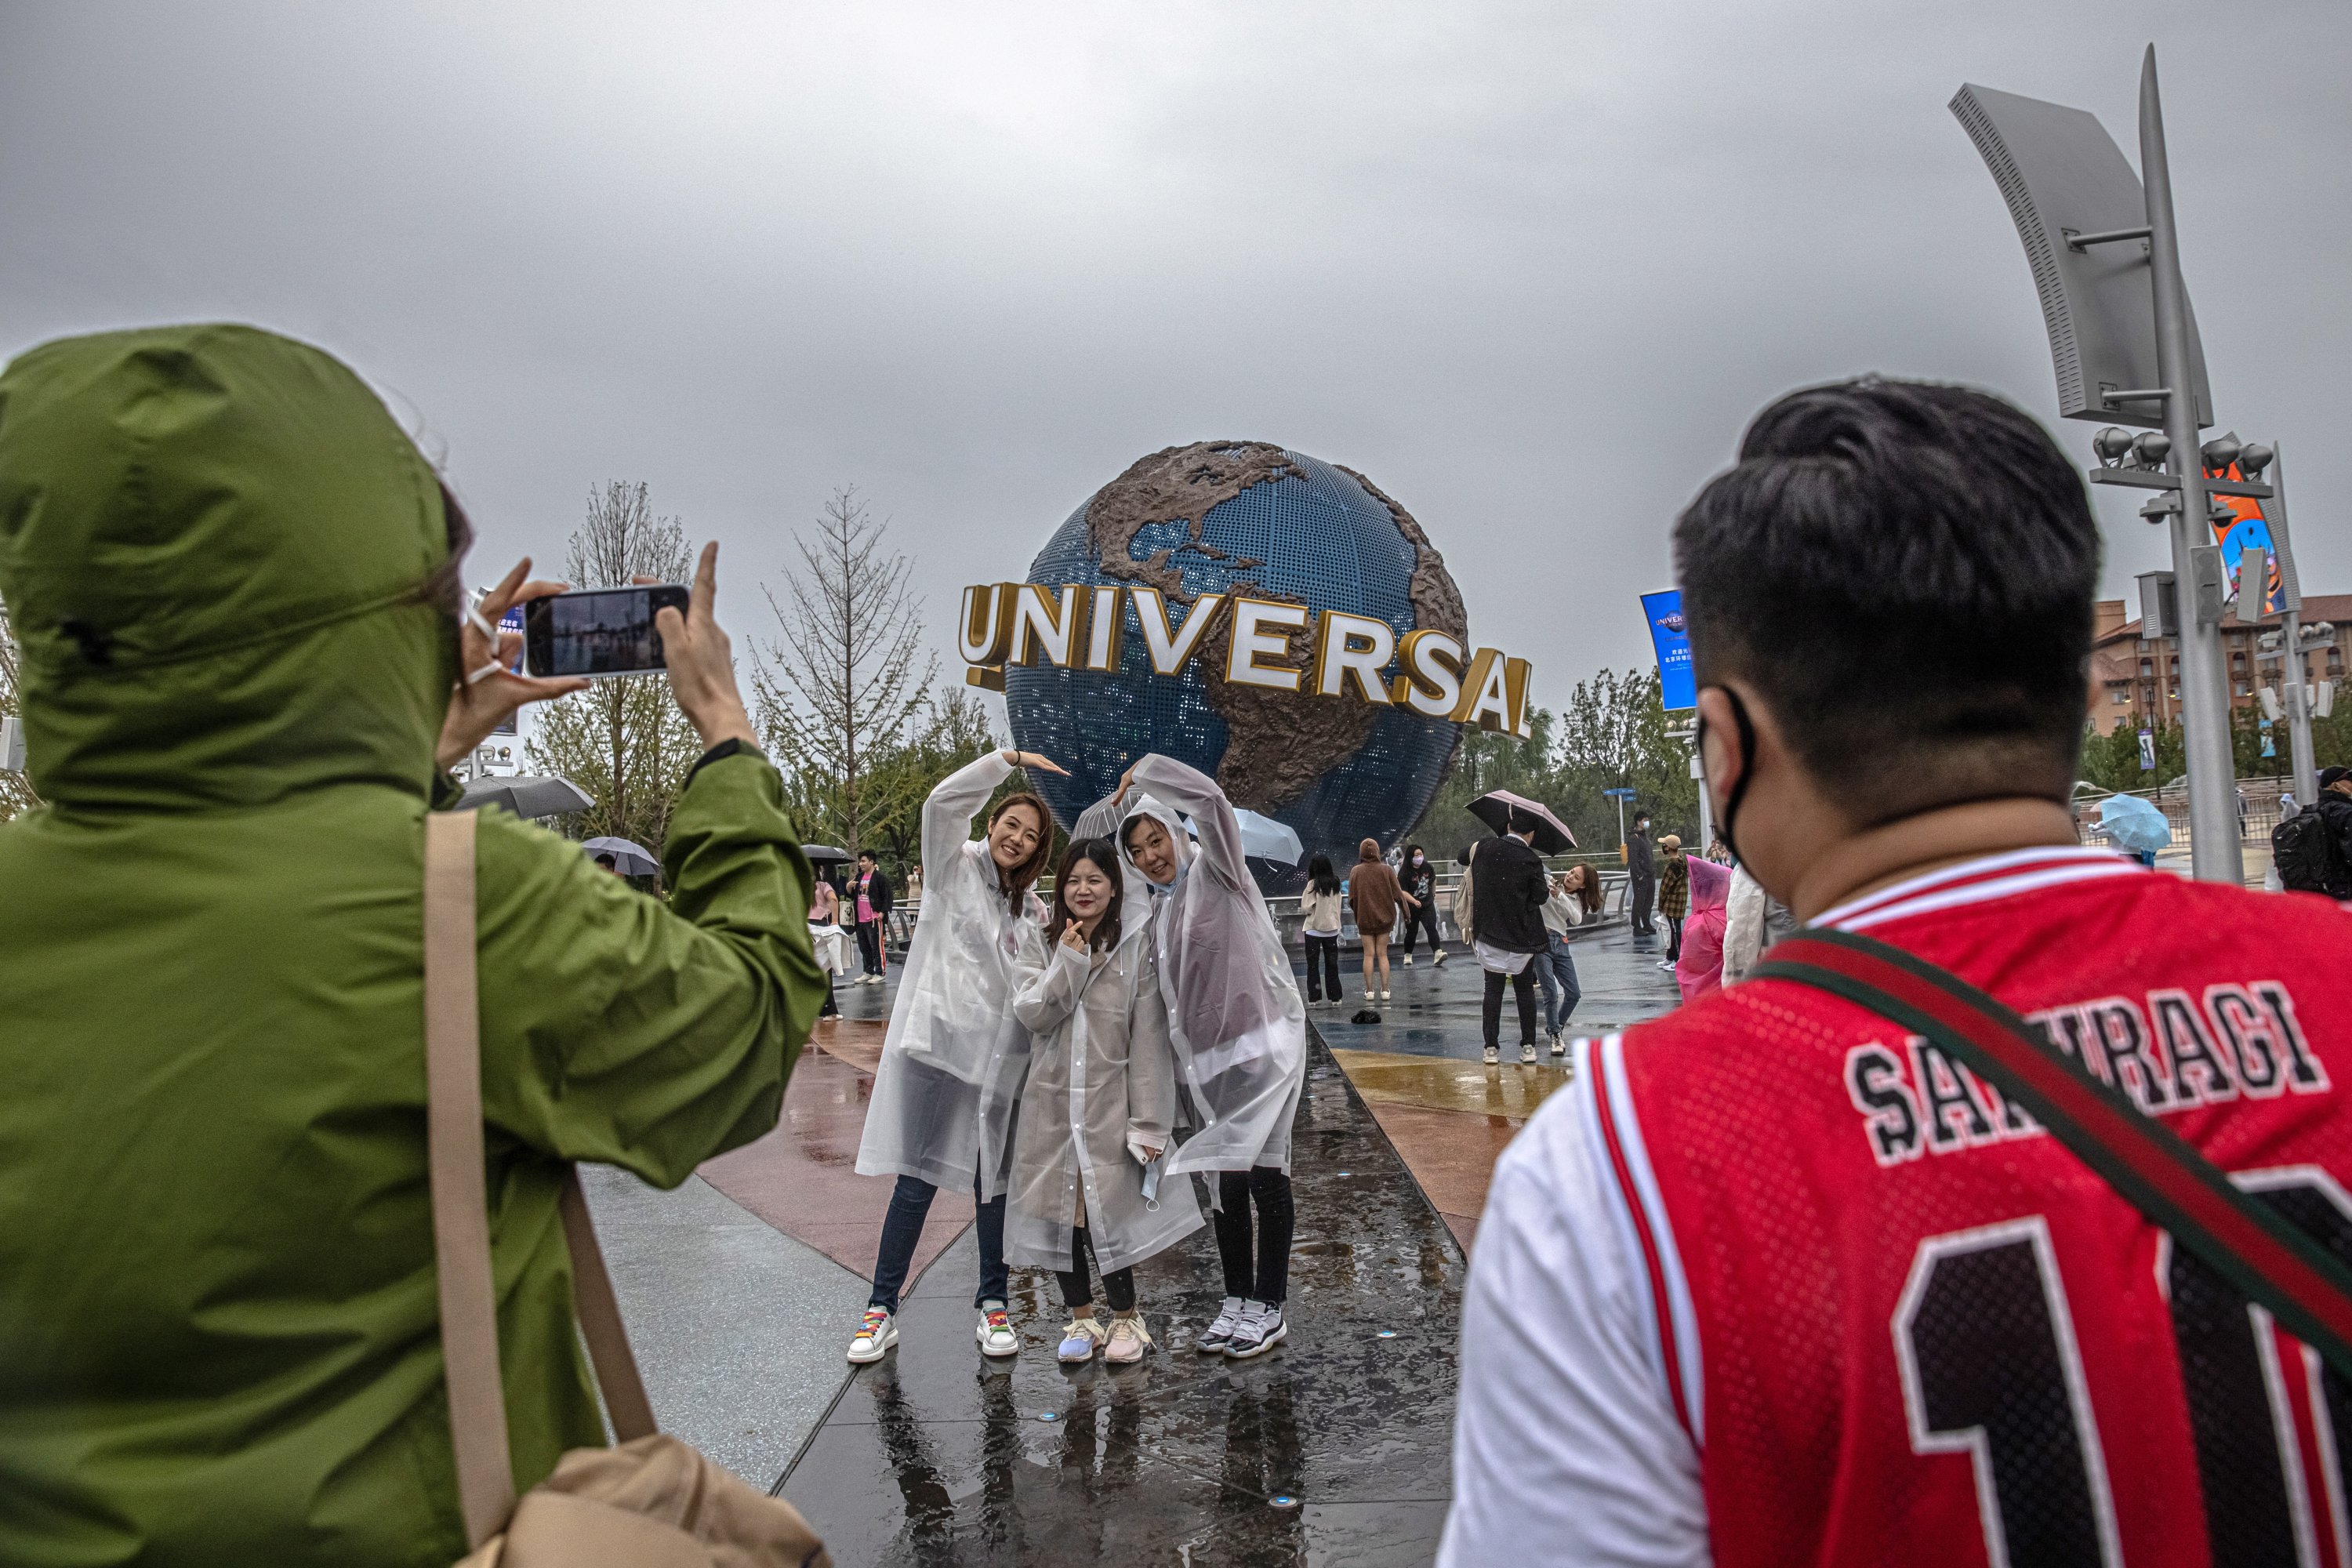 Visitors pose for photos near the entrance to Universal Studios Beijing on the official opening day, in Beijing, China, Sept. 20, 2021. (EPA Photo).